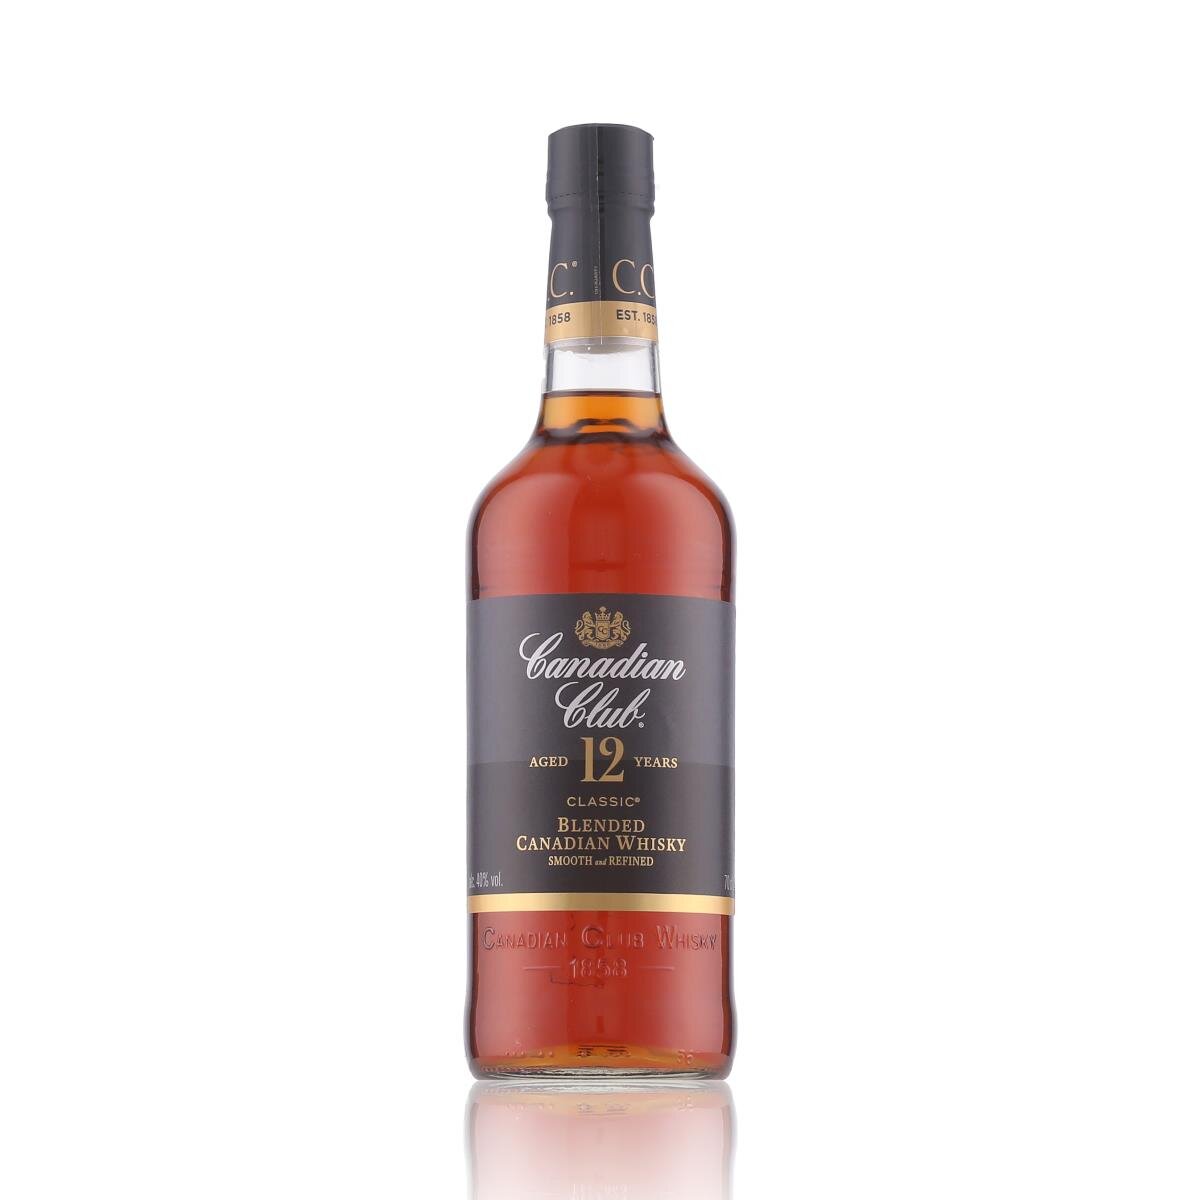 Canadian Club 12 Years Vol. 23,89 Blended 40% € 0,7l, Whisky Canadian